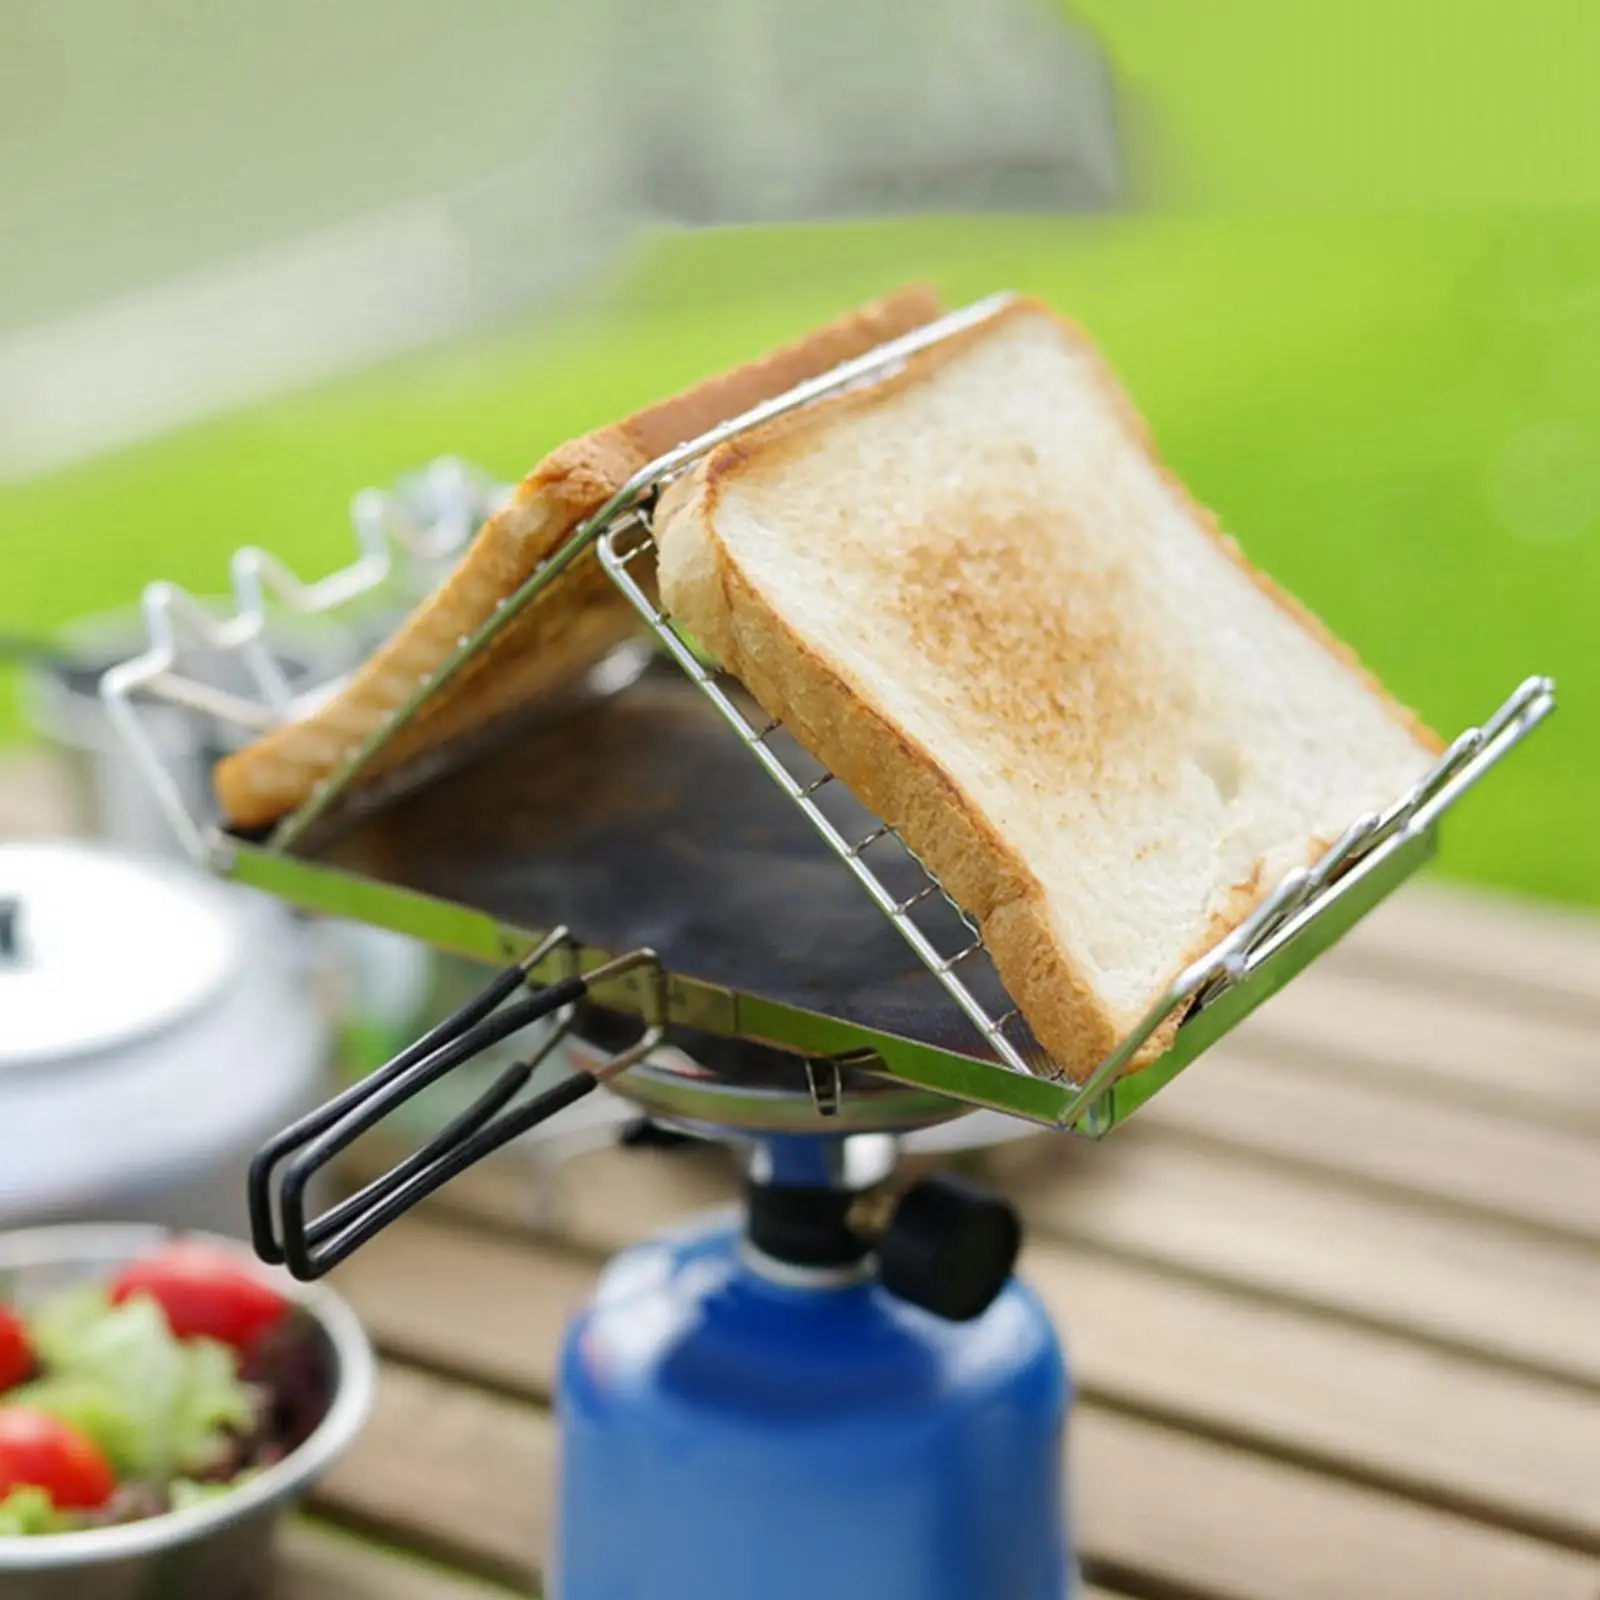 Grill Basket Net Holder Foldable Mesh Stainless Steel Barbecue for Toast